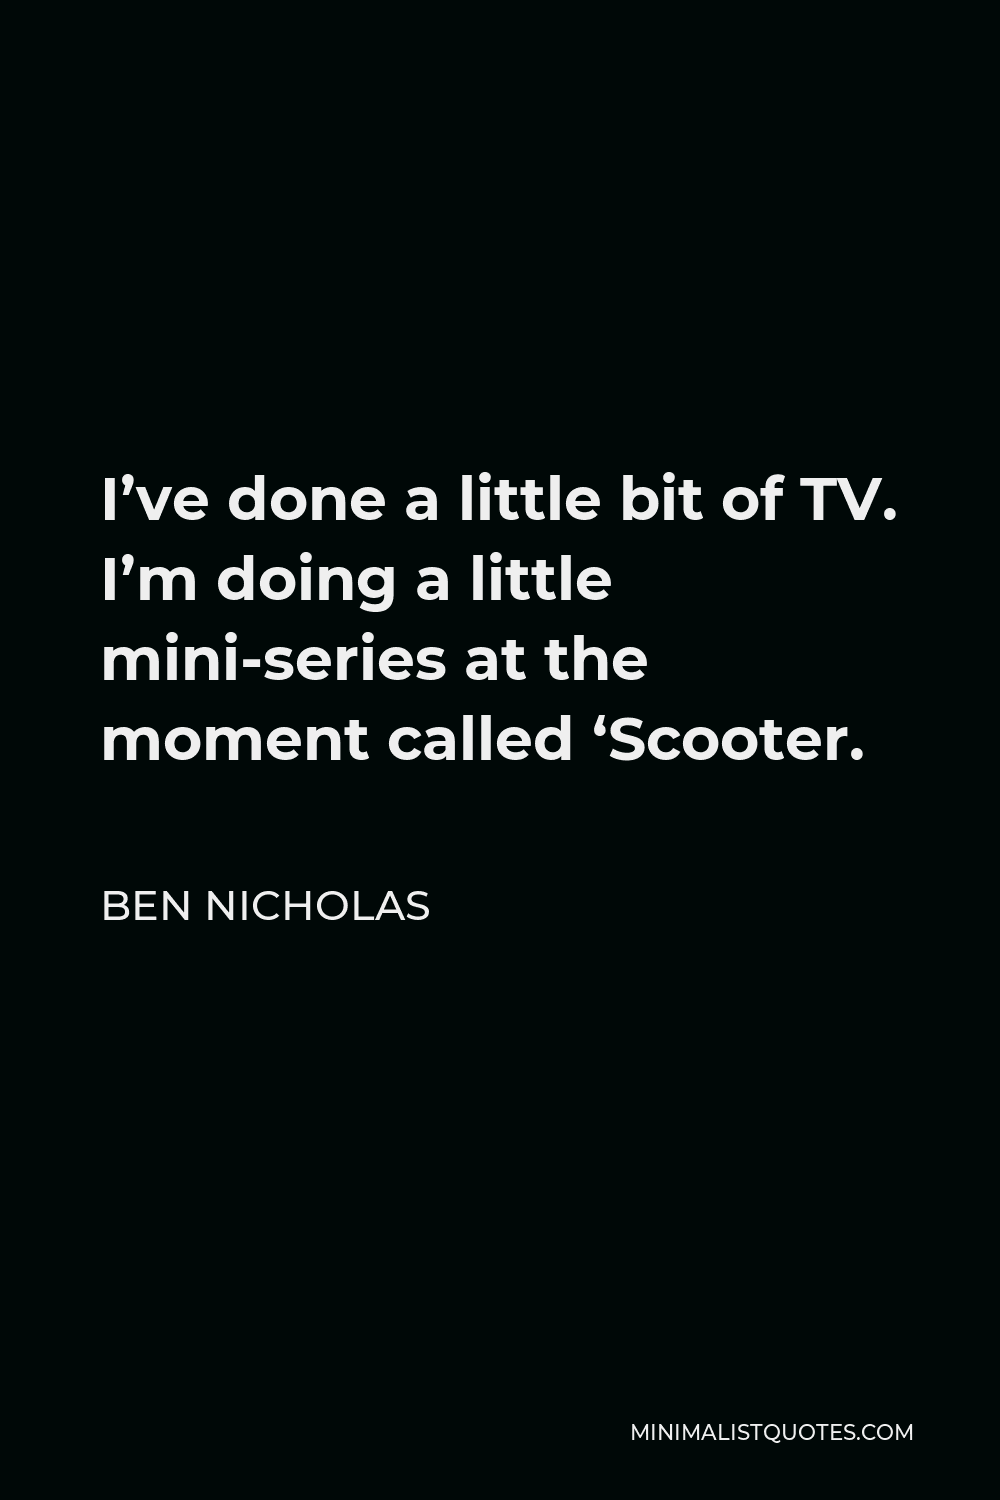 Ben Nicholas Quote - I’ve done a little bit of TV. I’m doing a little mini-series at the moment called ‘Scooter.